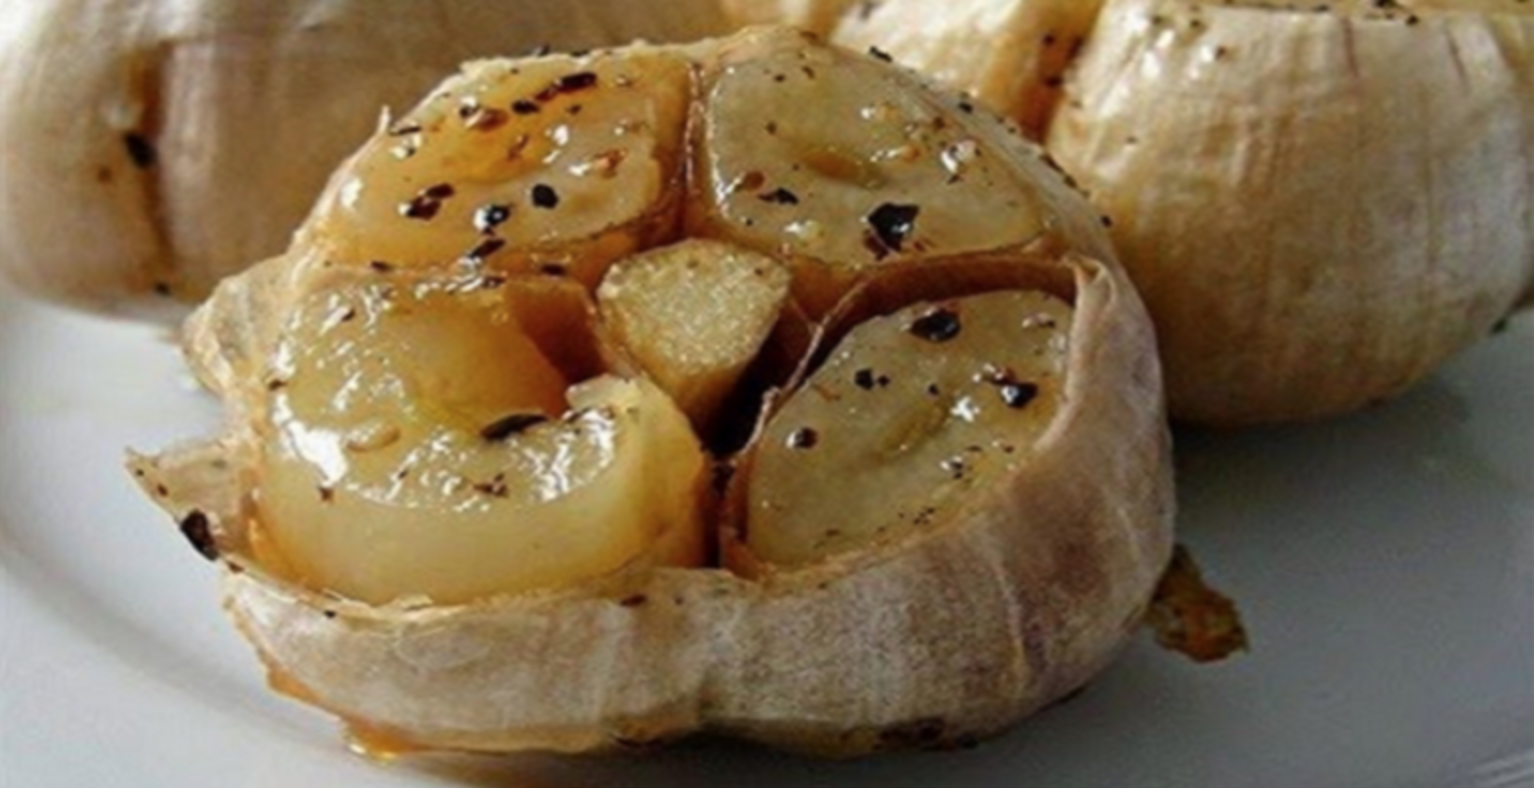 Eating 6 Roasted Garlic Cloves Will Heal Your Body Just in 24 Hours